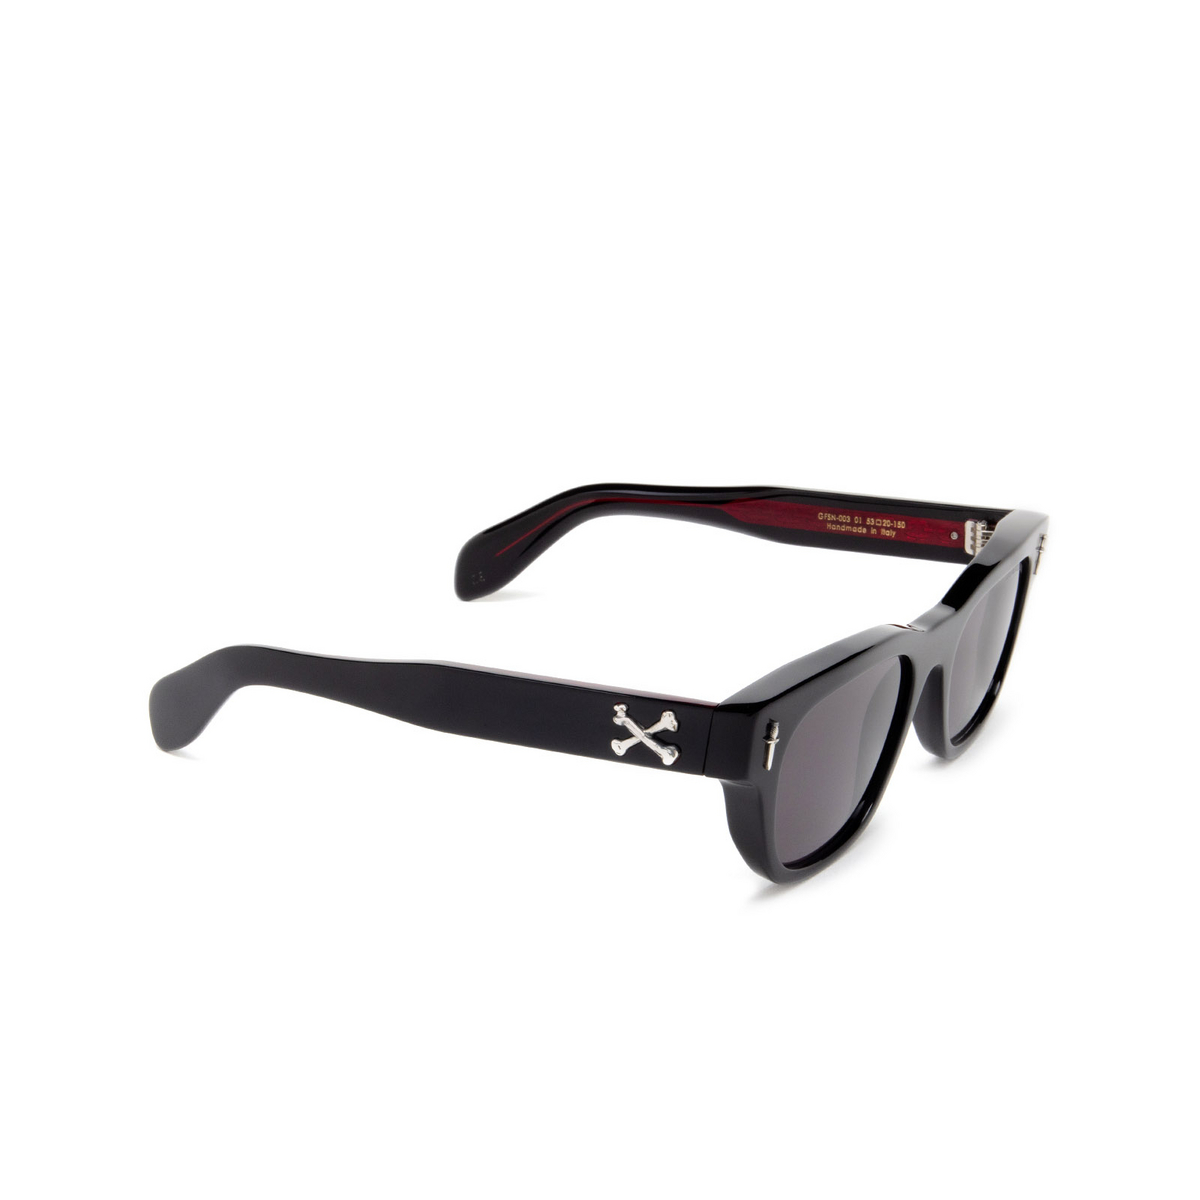 Cutler and Gross 003 Sunglasses 01 Black - three-quarters view